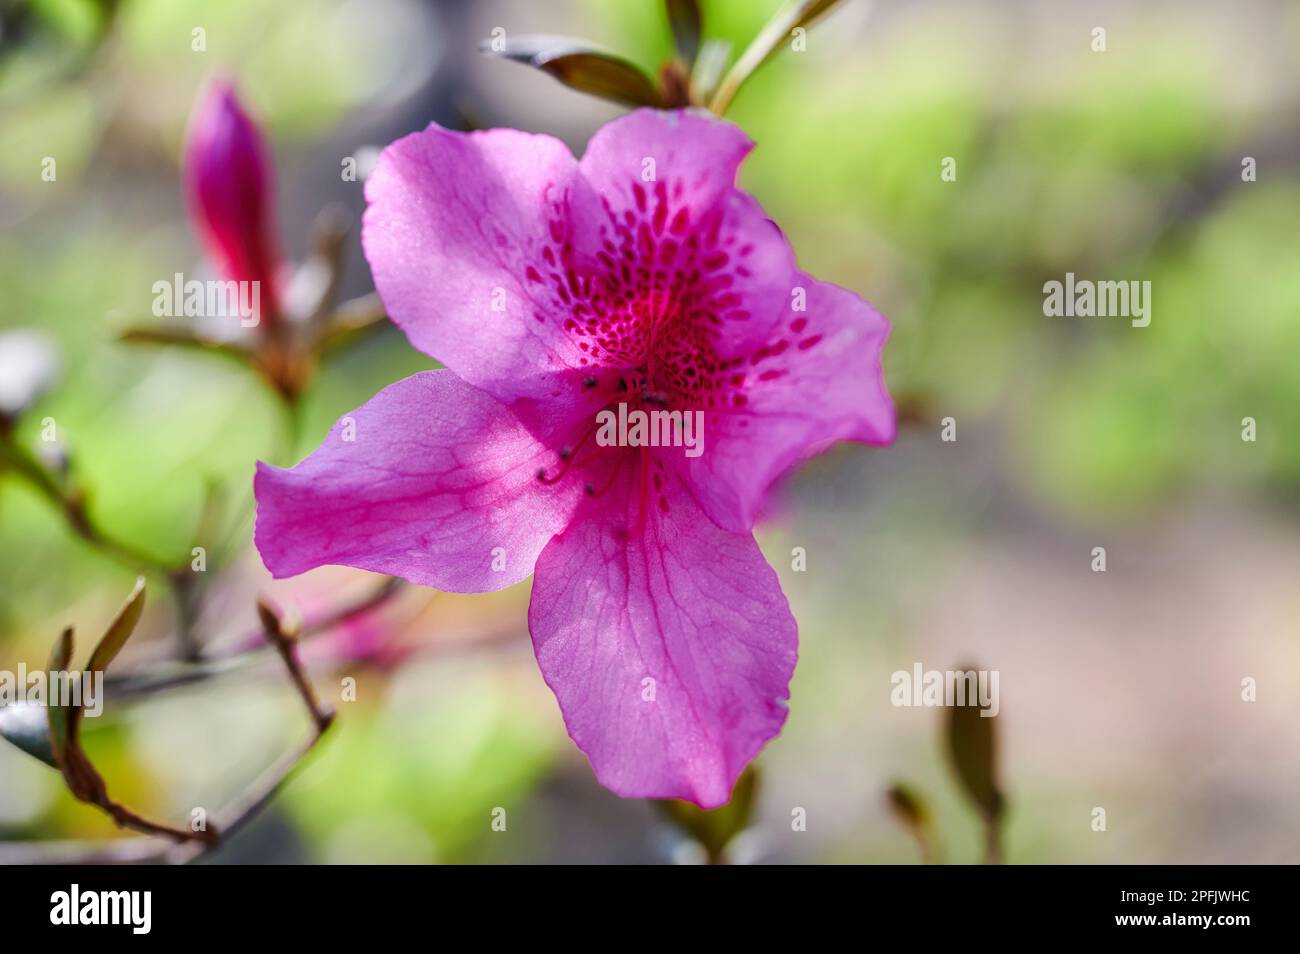 Spring is starting to show itself as this Azalea is starting to bloom. Azaleas /əˈzeɪliə/ are flowering shrubs in the genus Rhododendron. Stock Photo